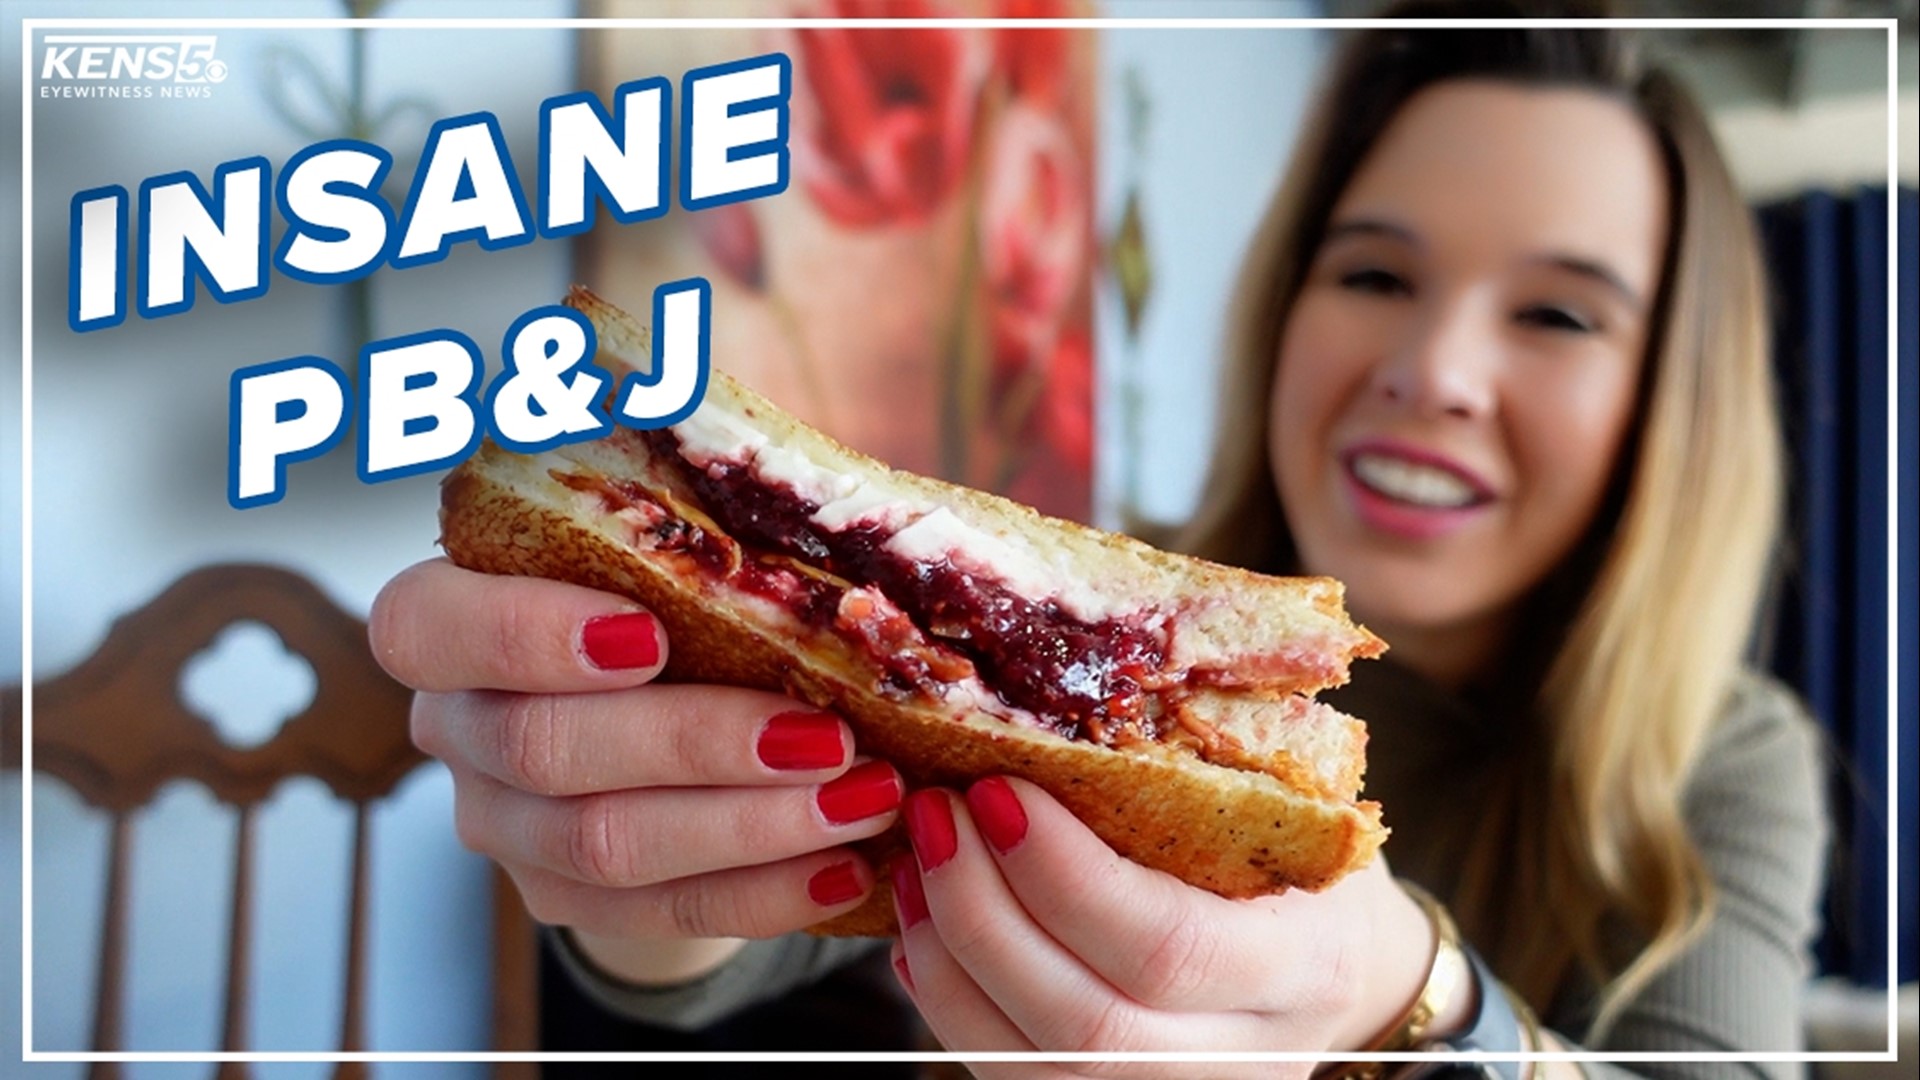 You can do a classic PB&J with strawberry or grape jelly. Or, you can take it further.